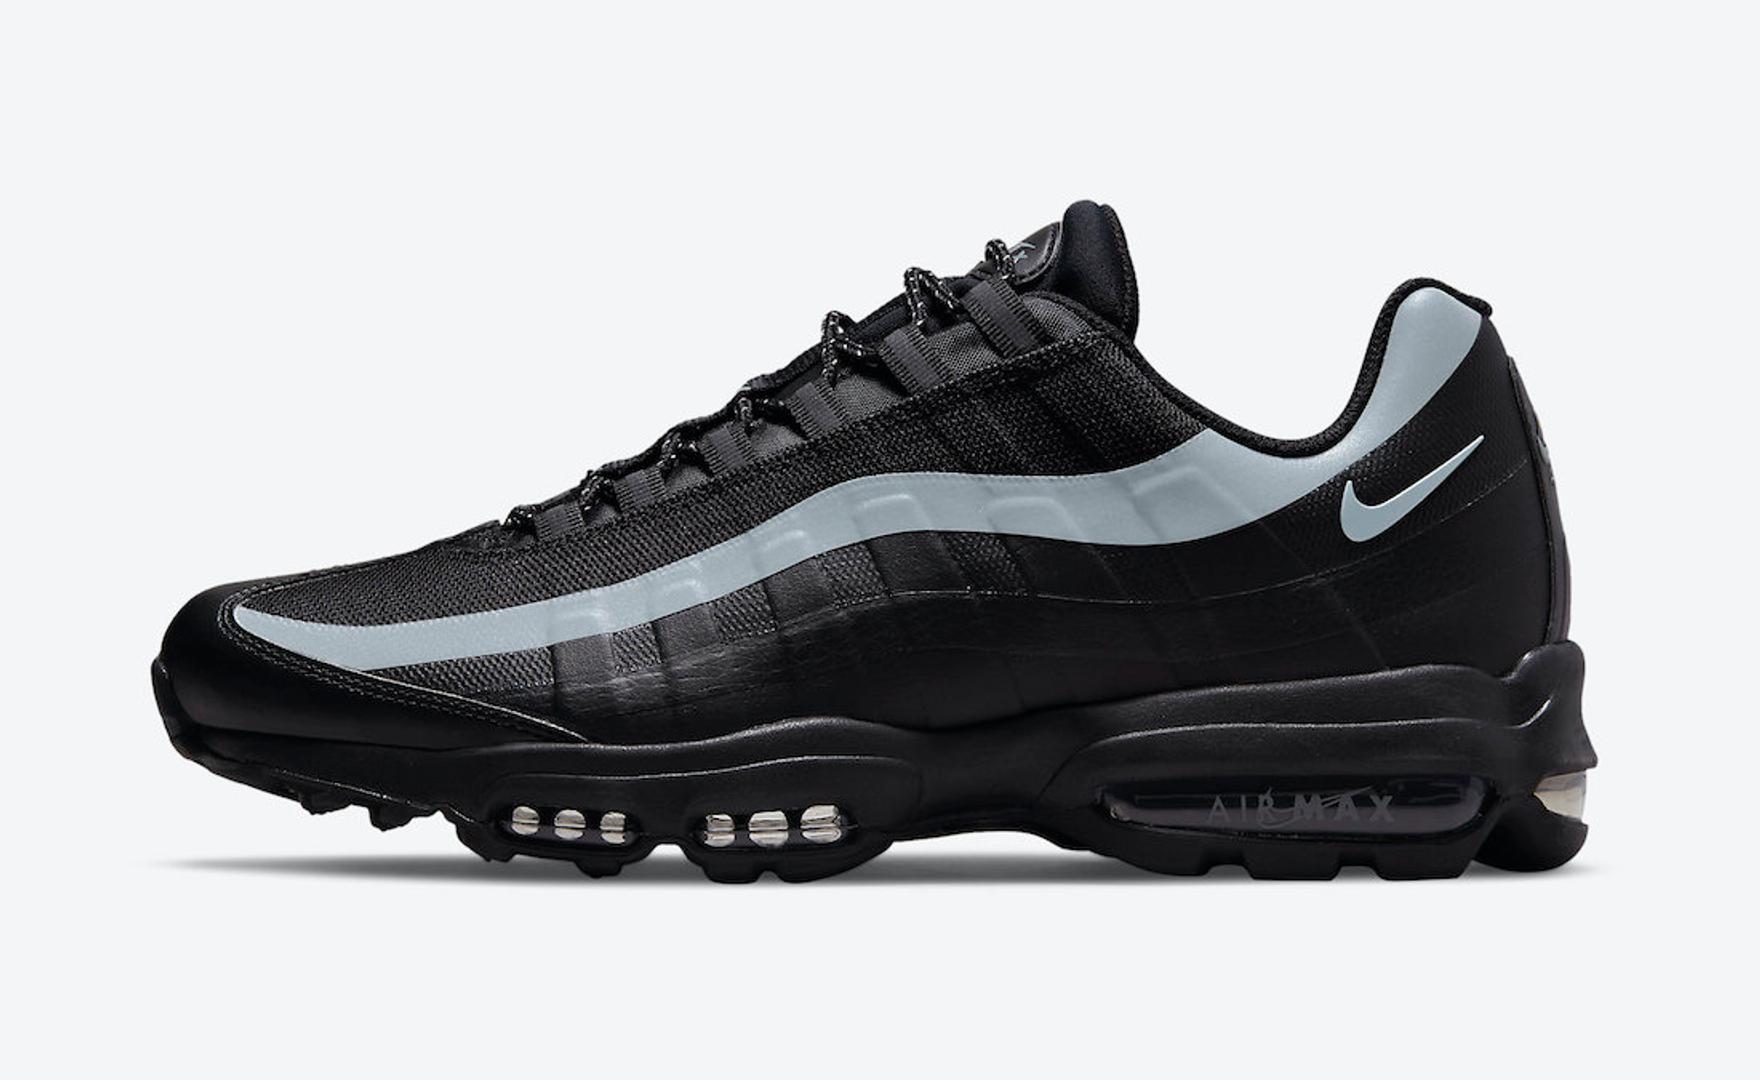 The Nike Air Max 95 Ultra Gets Murdered Out